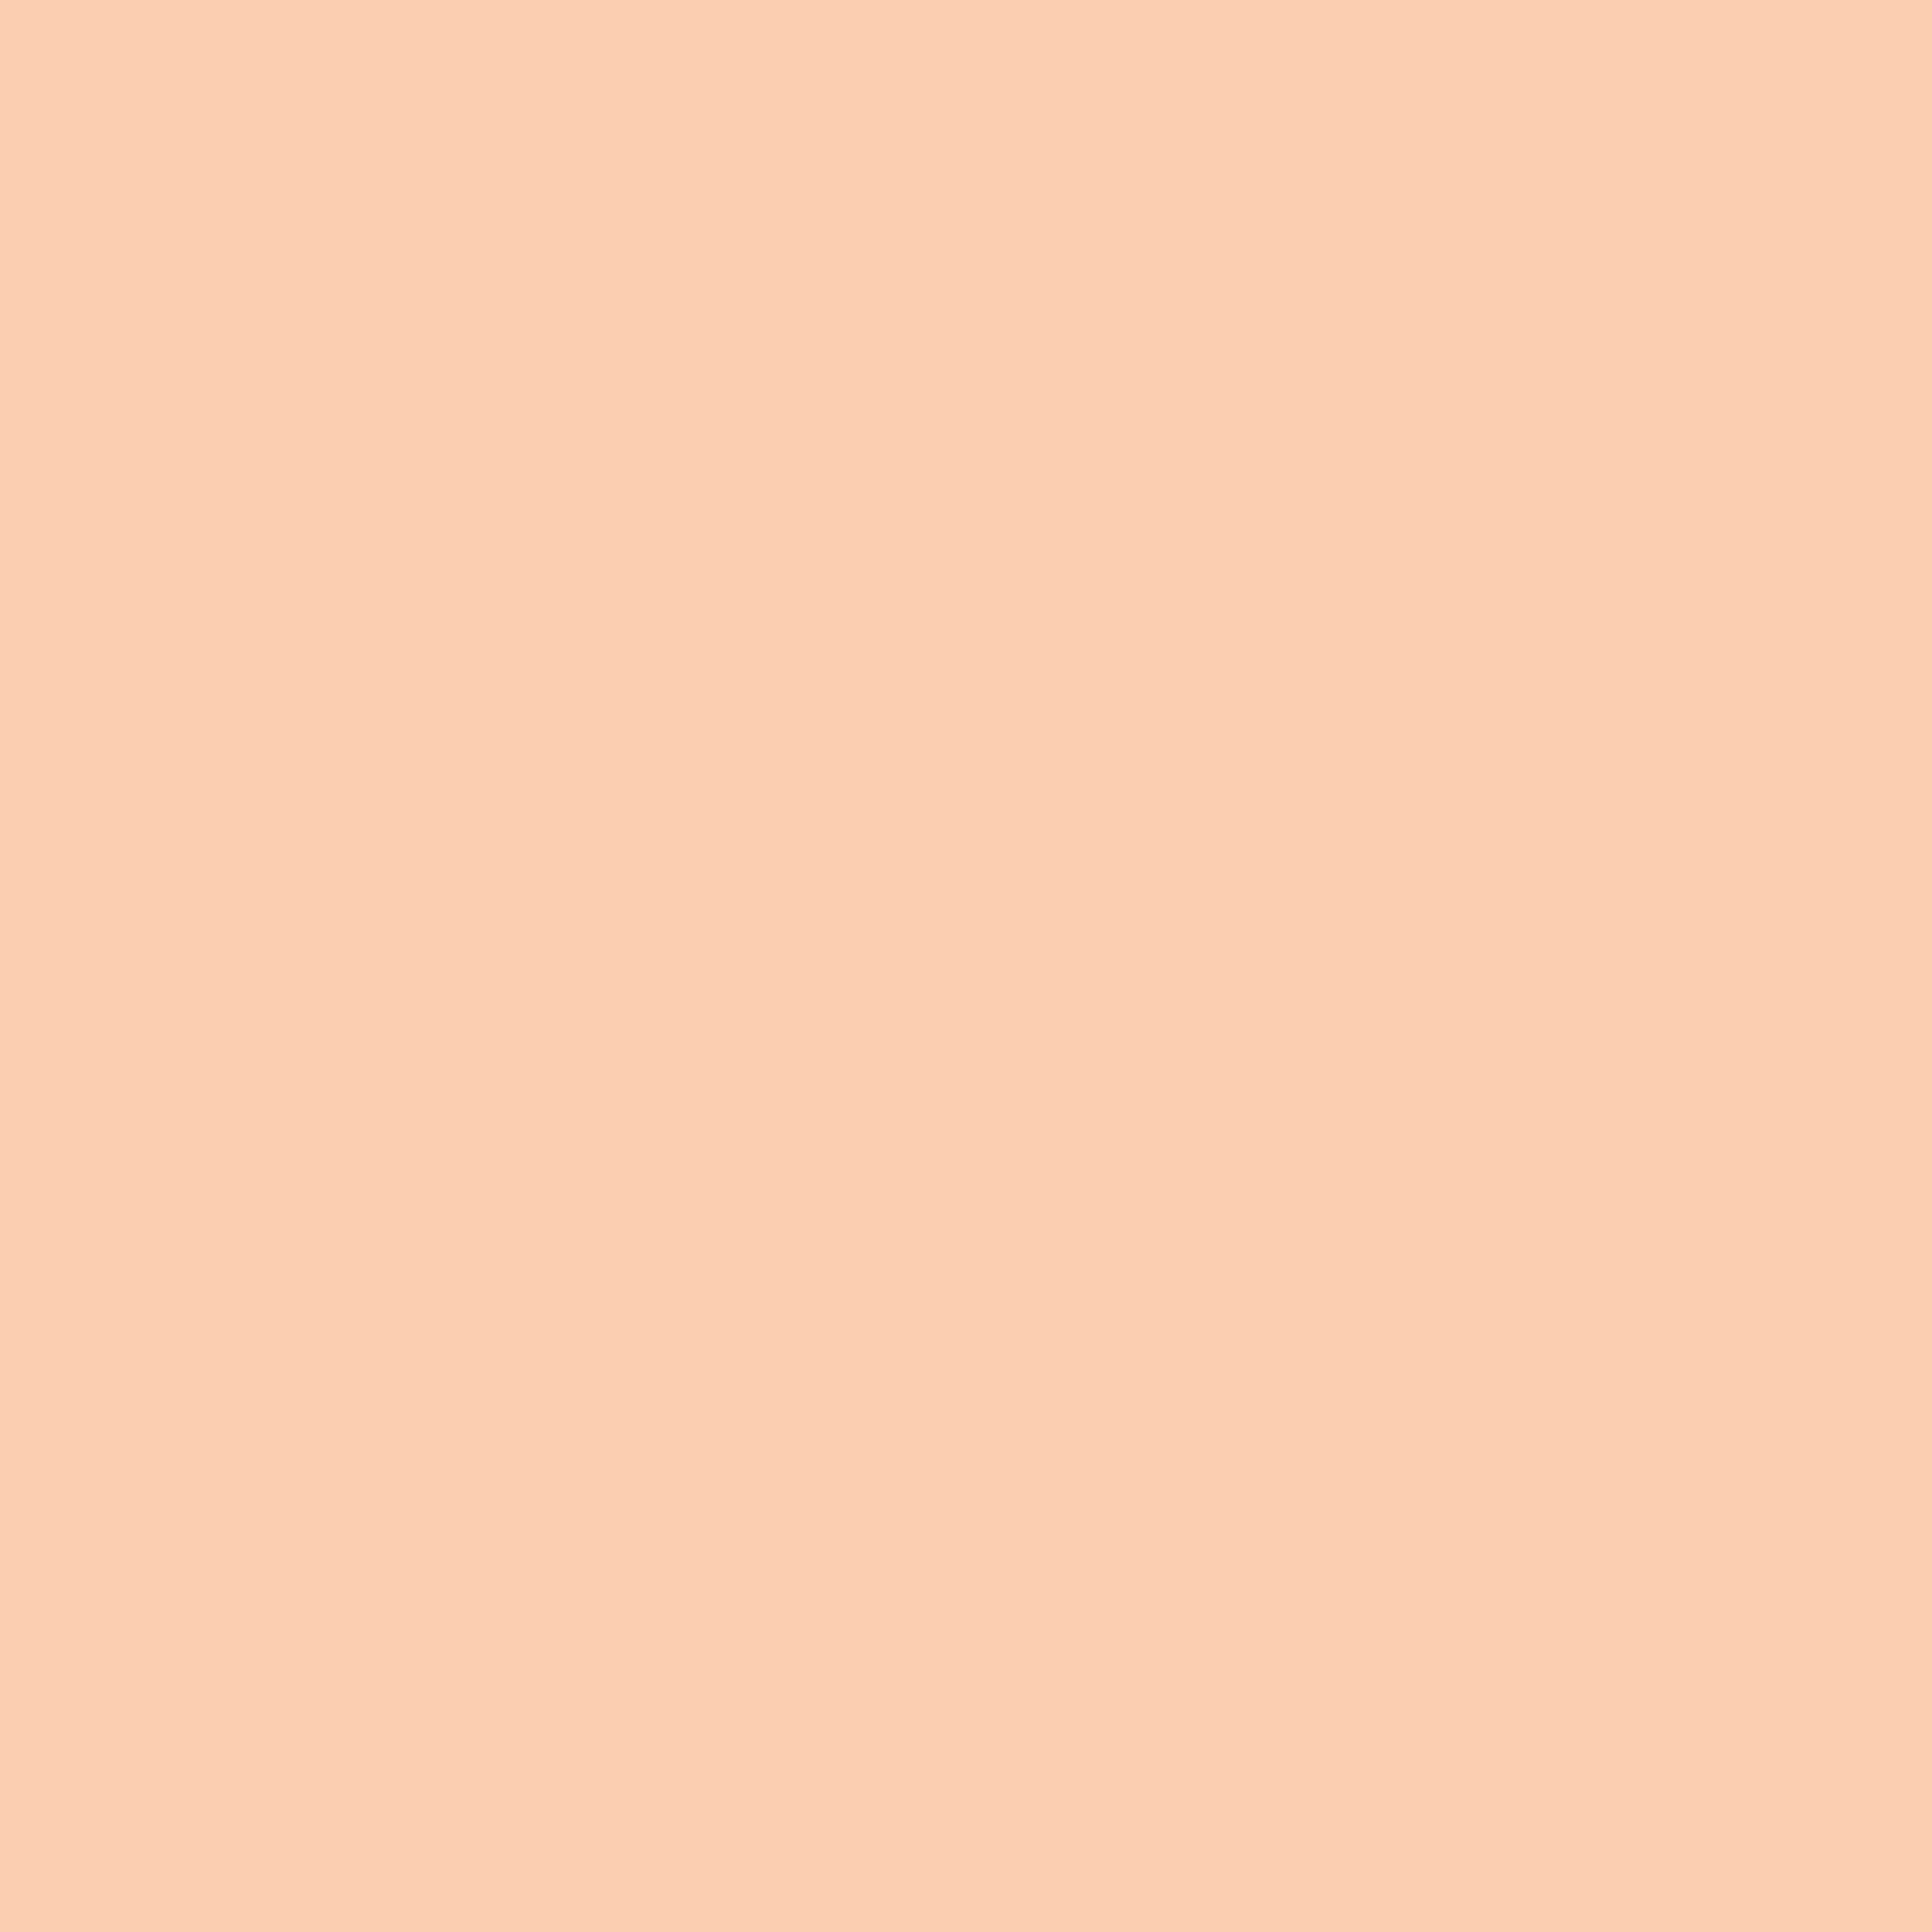 2048x2048 Apricot Solid Color Background